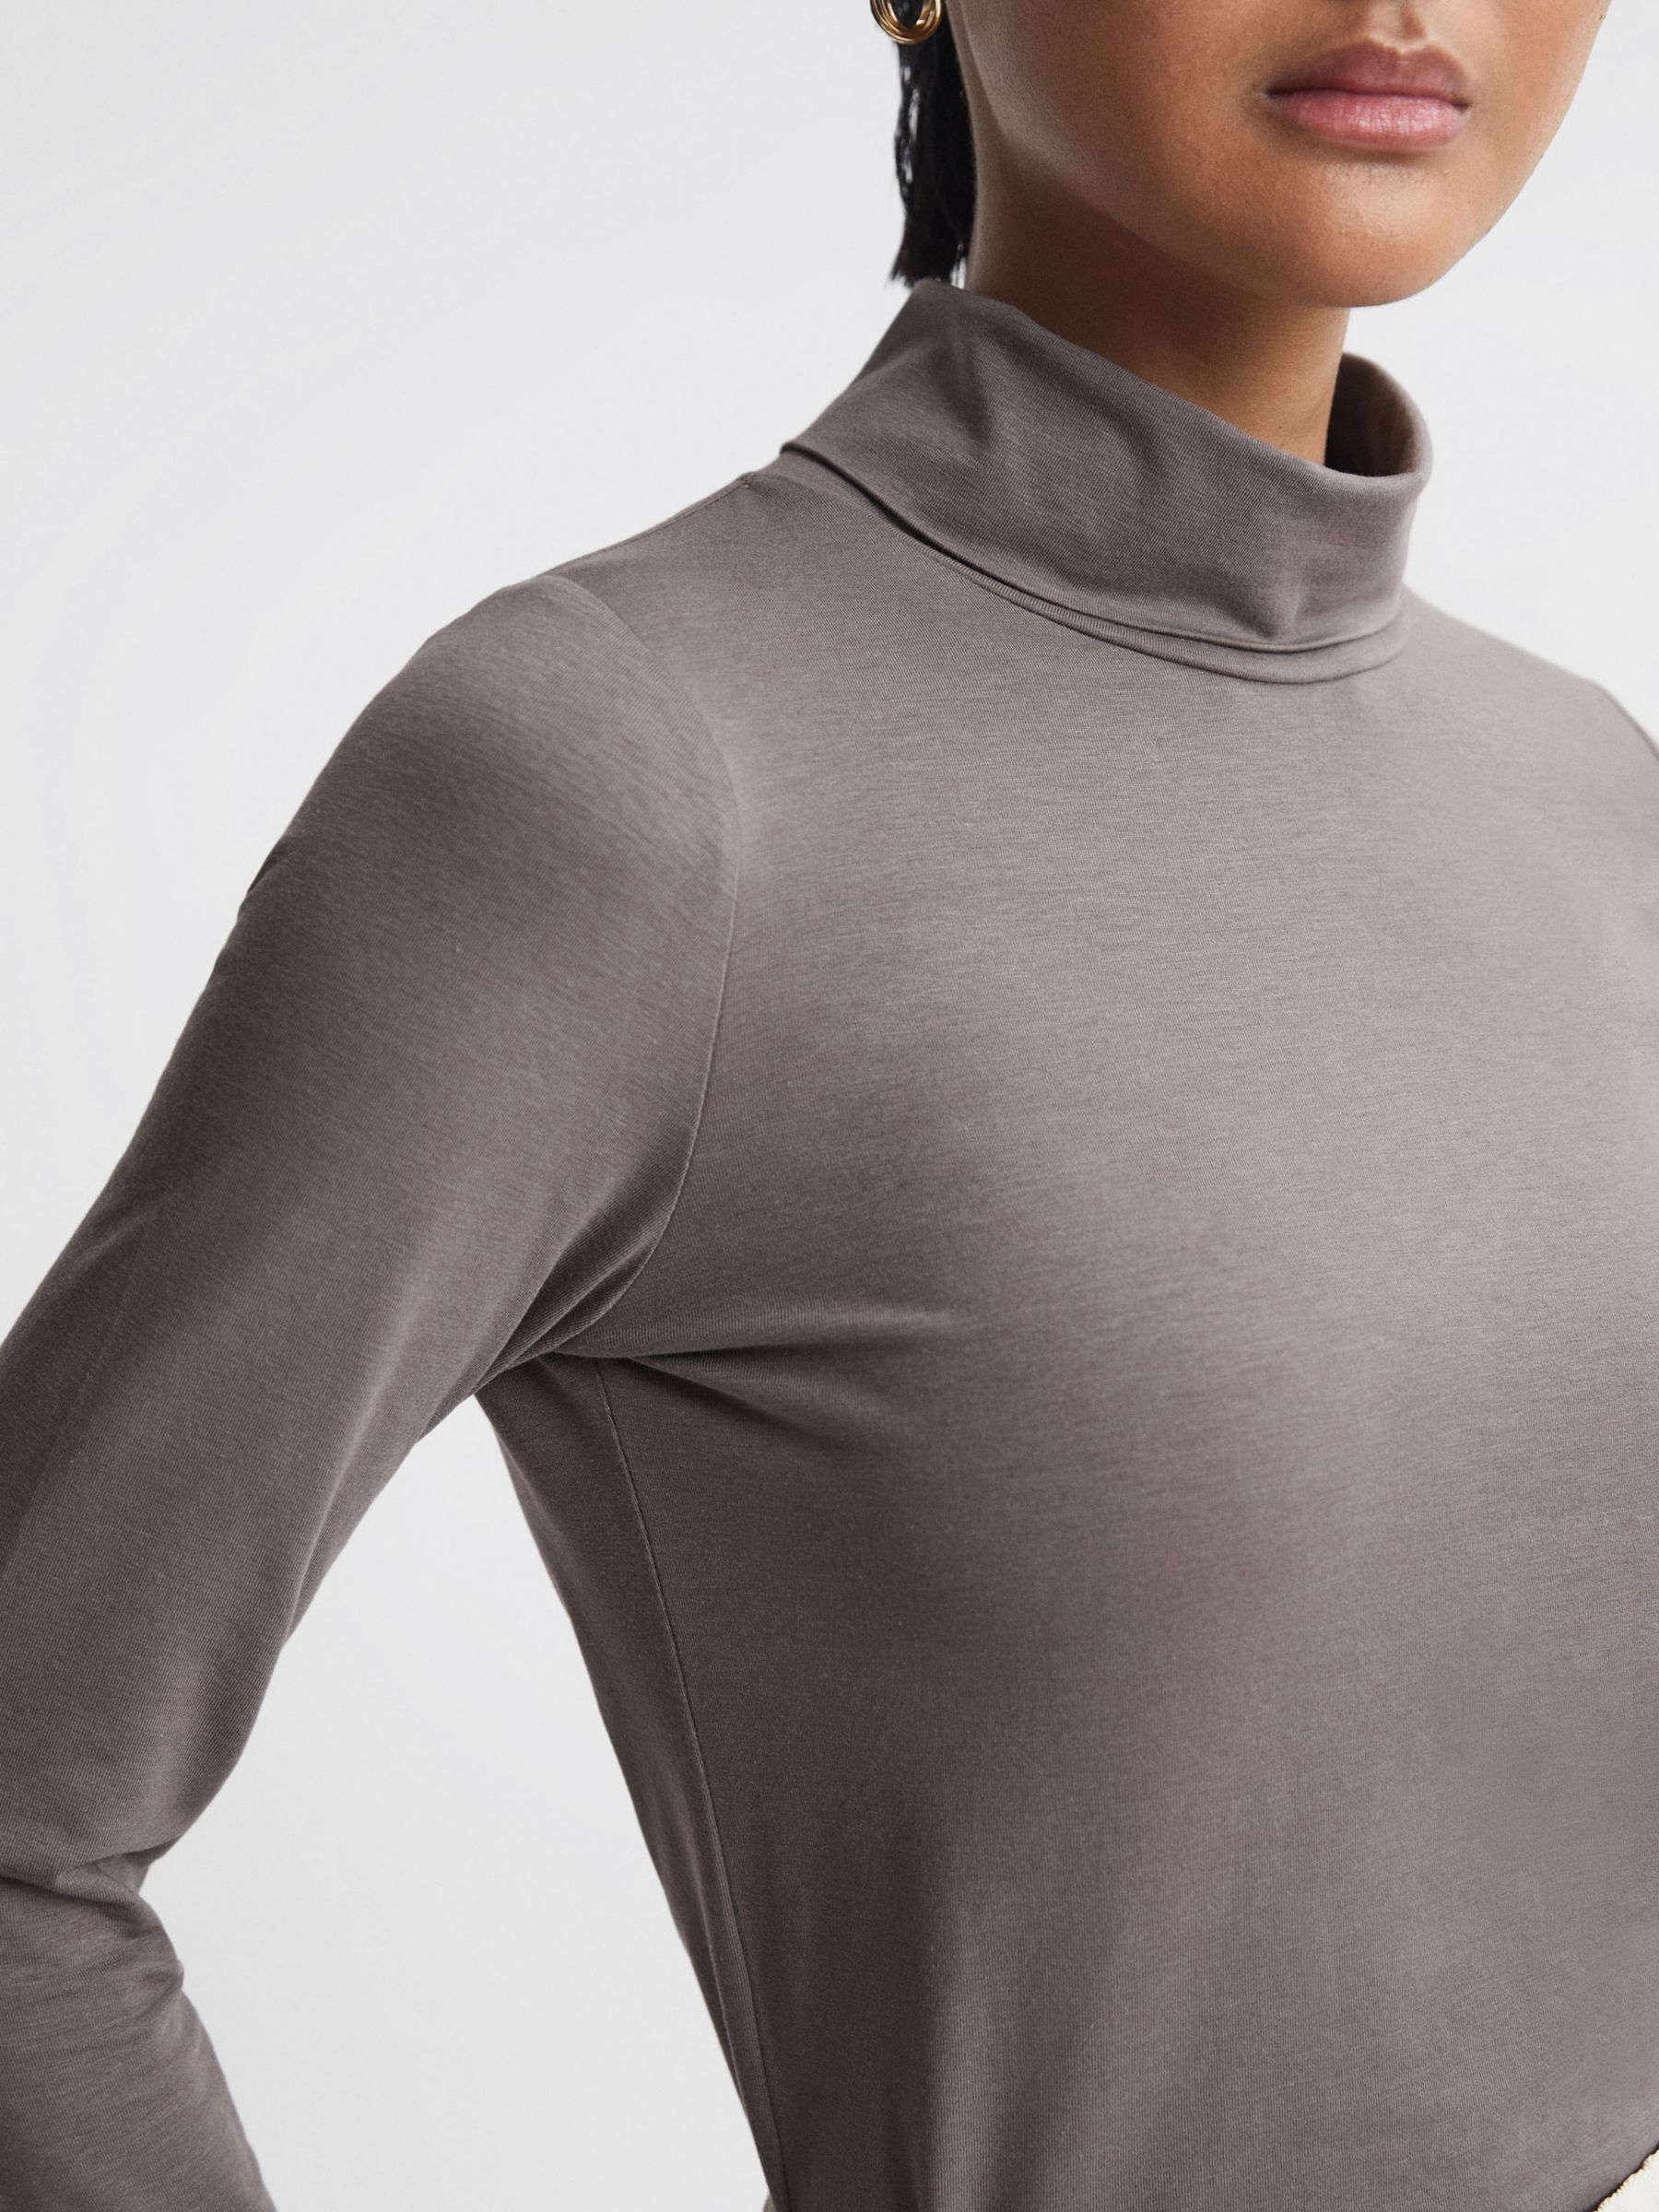 Reiss Piper Fitted Roll Neck Top, Taupe at John Lewis & Partners